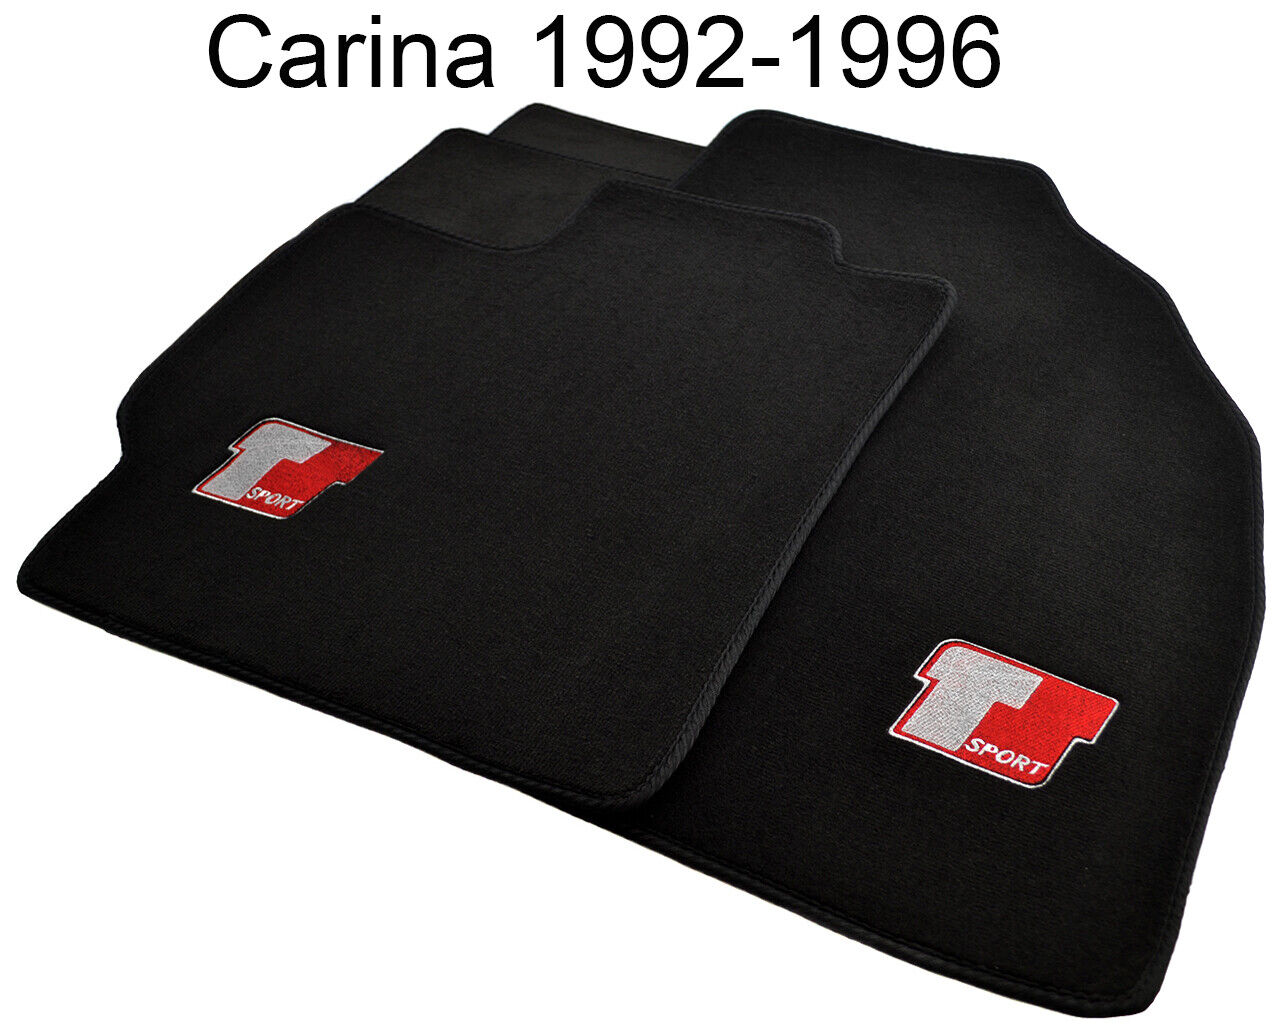 Floor Mats For Toyota Carina 1992-1996 With Sport Emblem Black Tailored Carpets